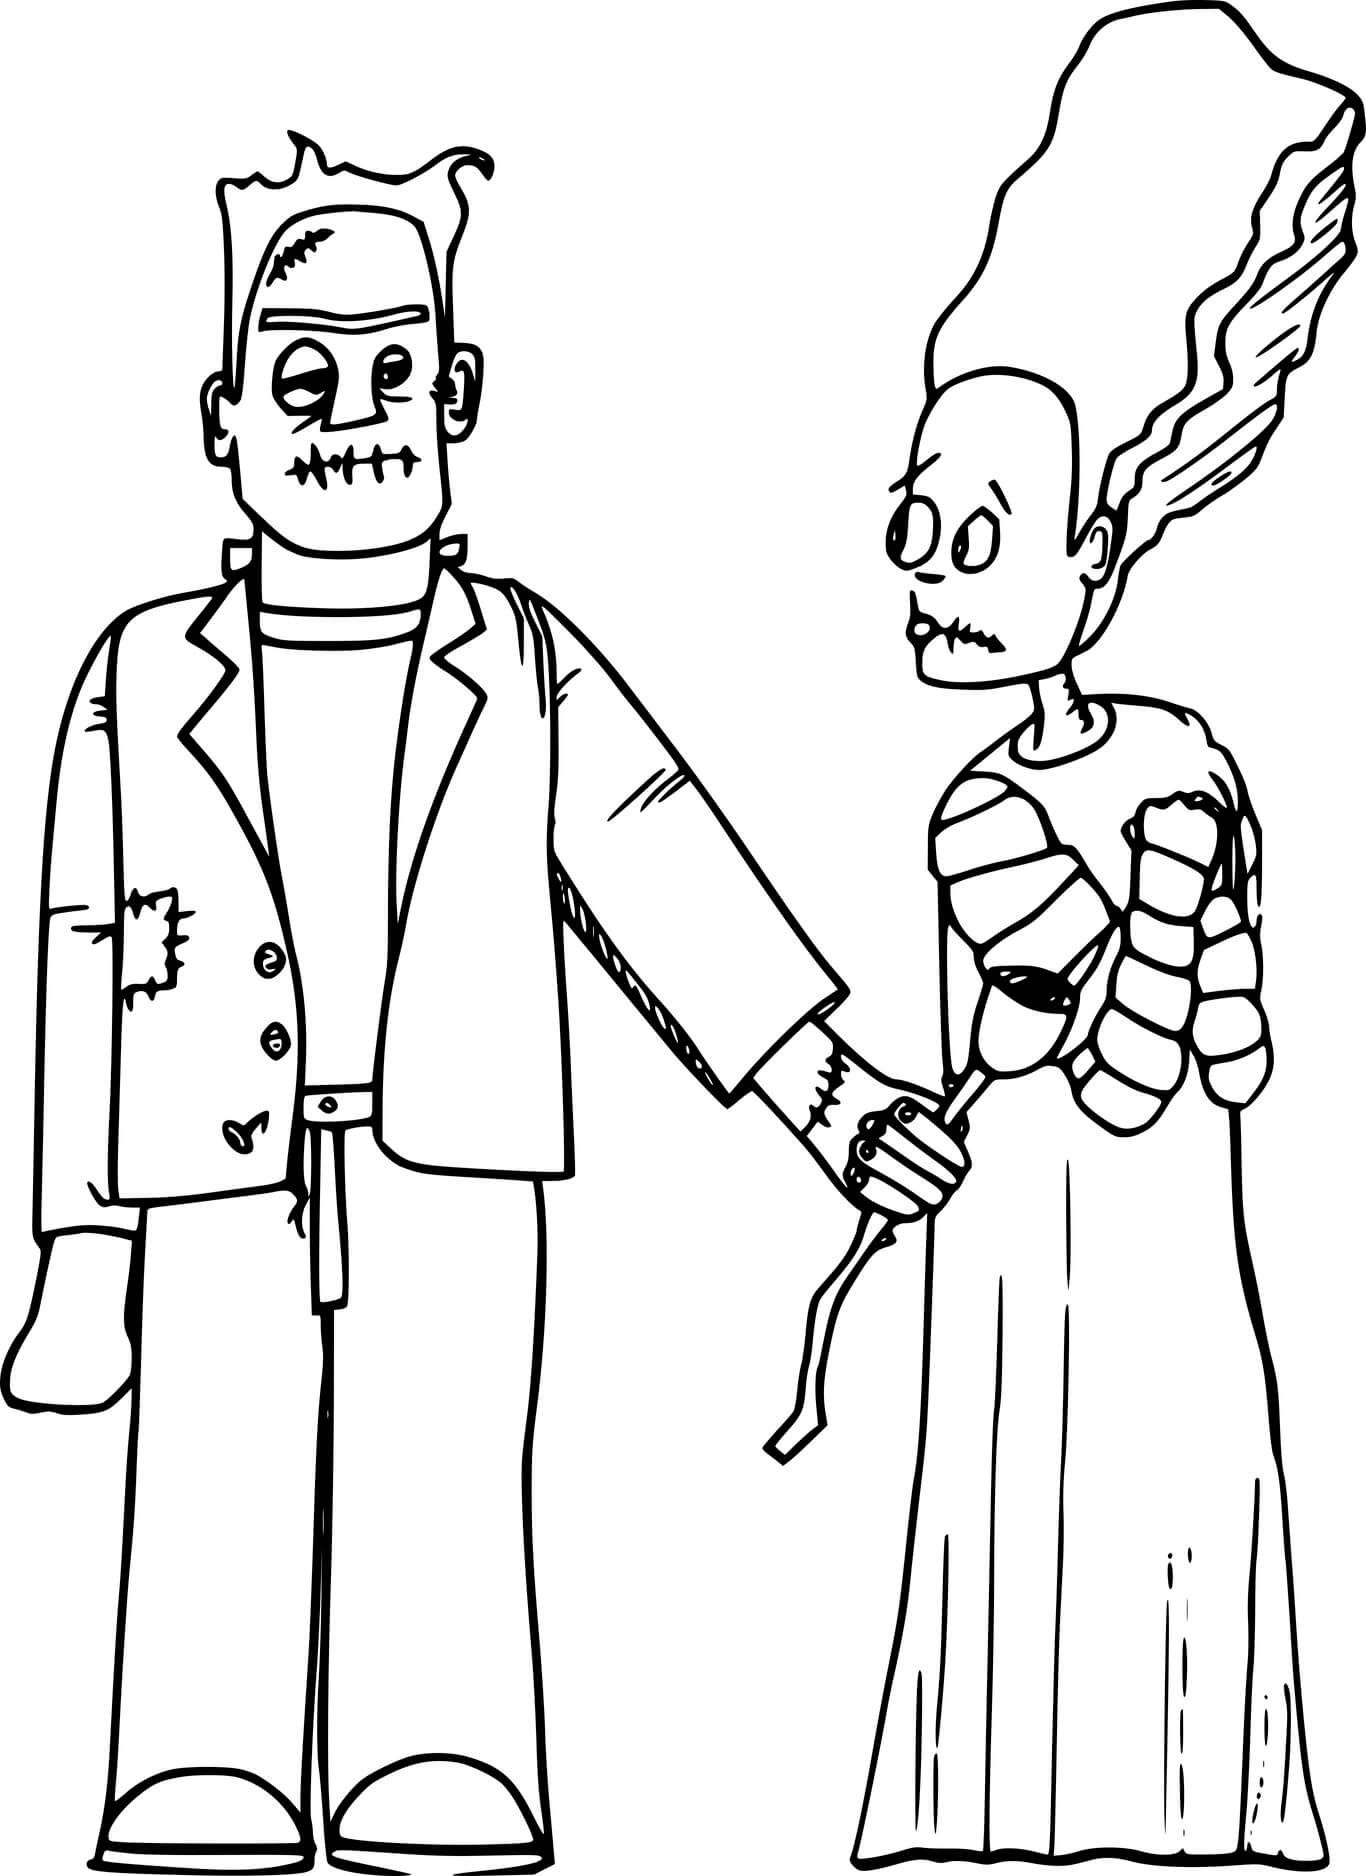 Frankenstein Sends Flowers To A Lady